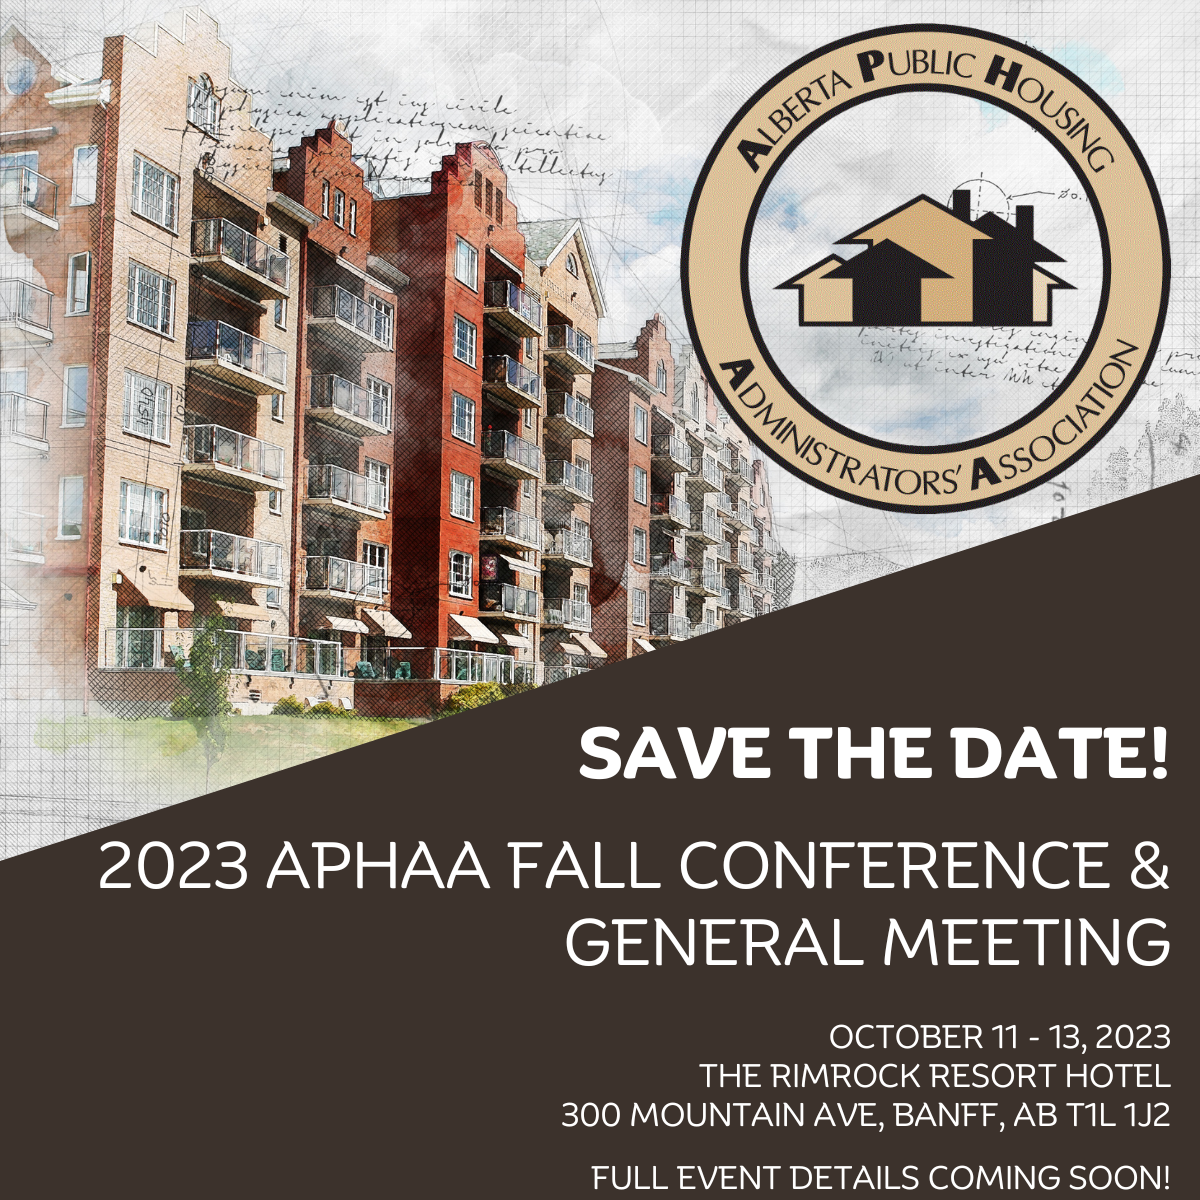 APHAA 2023 Fall Conference & General Meeting